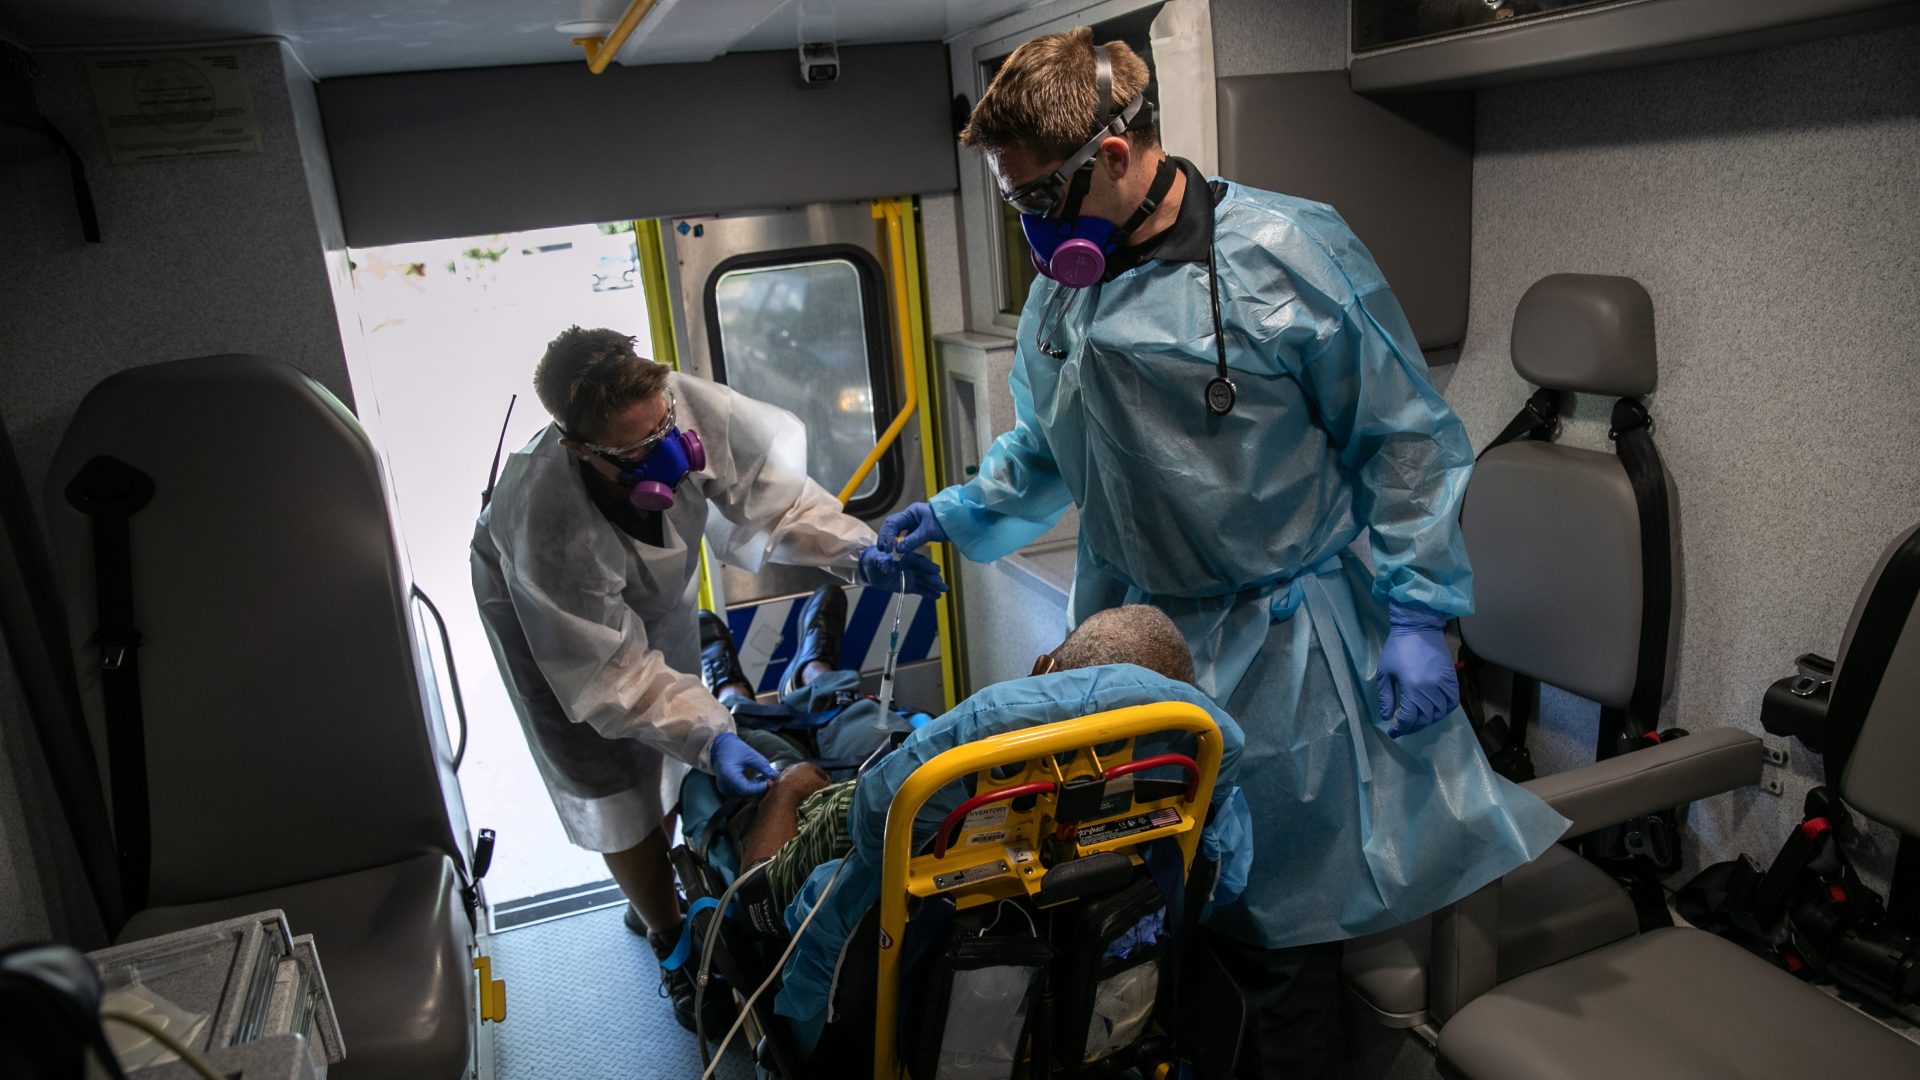 Medics transport a man with COVID-19 symptoms to a hospital in Austin, Texas. More than 3 million people in the state have had COVID-19, but just 81,000 are listed in a central data set at the Centers for Disease Control and Prevention.